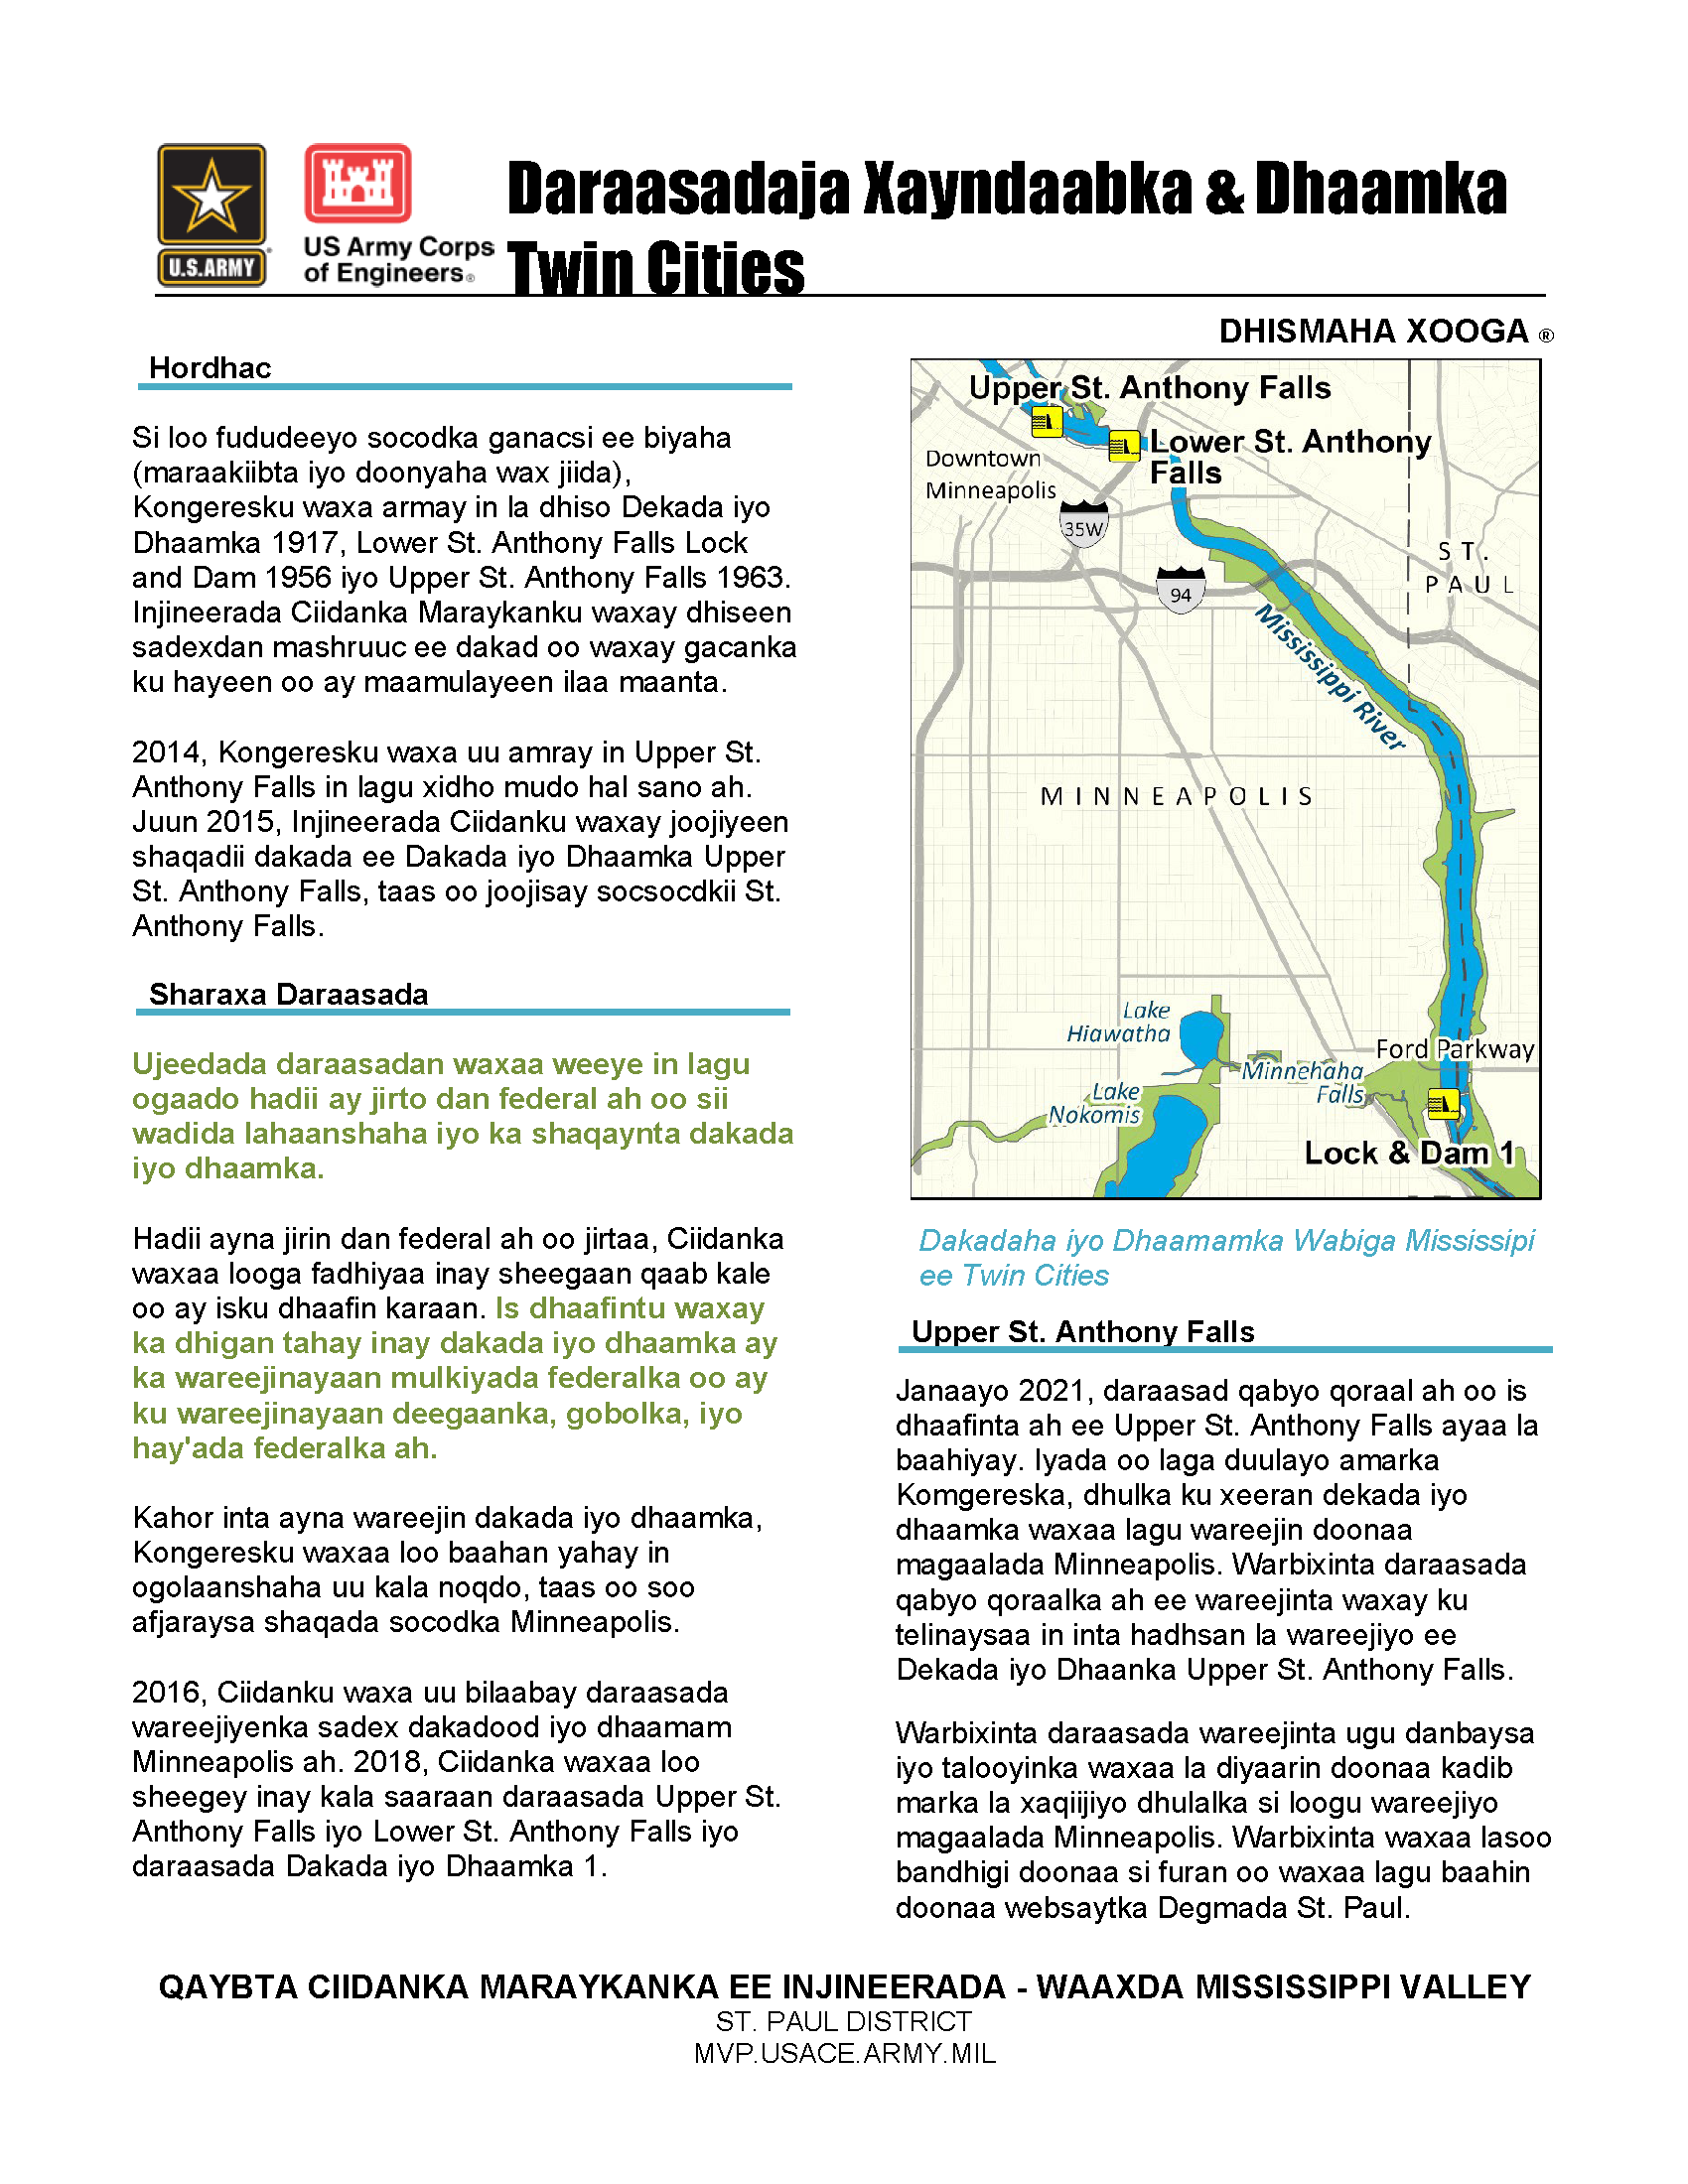 Twin Cities lock and dam disposition fact sheet in Somali